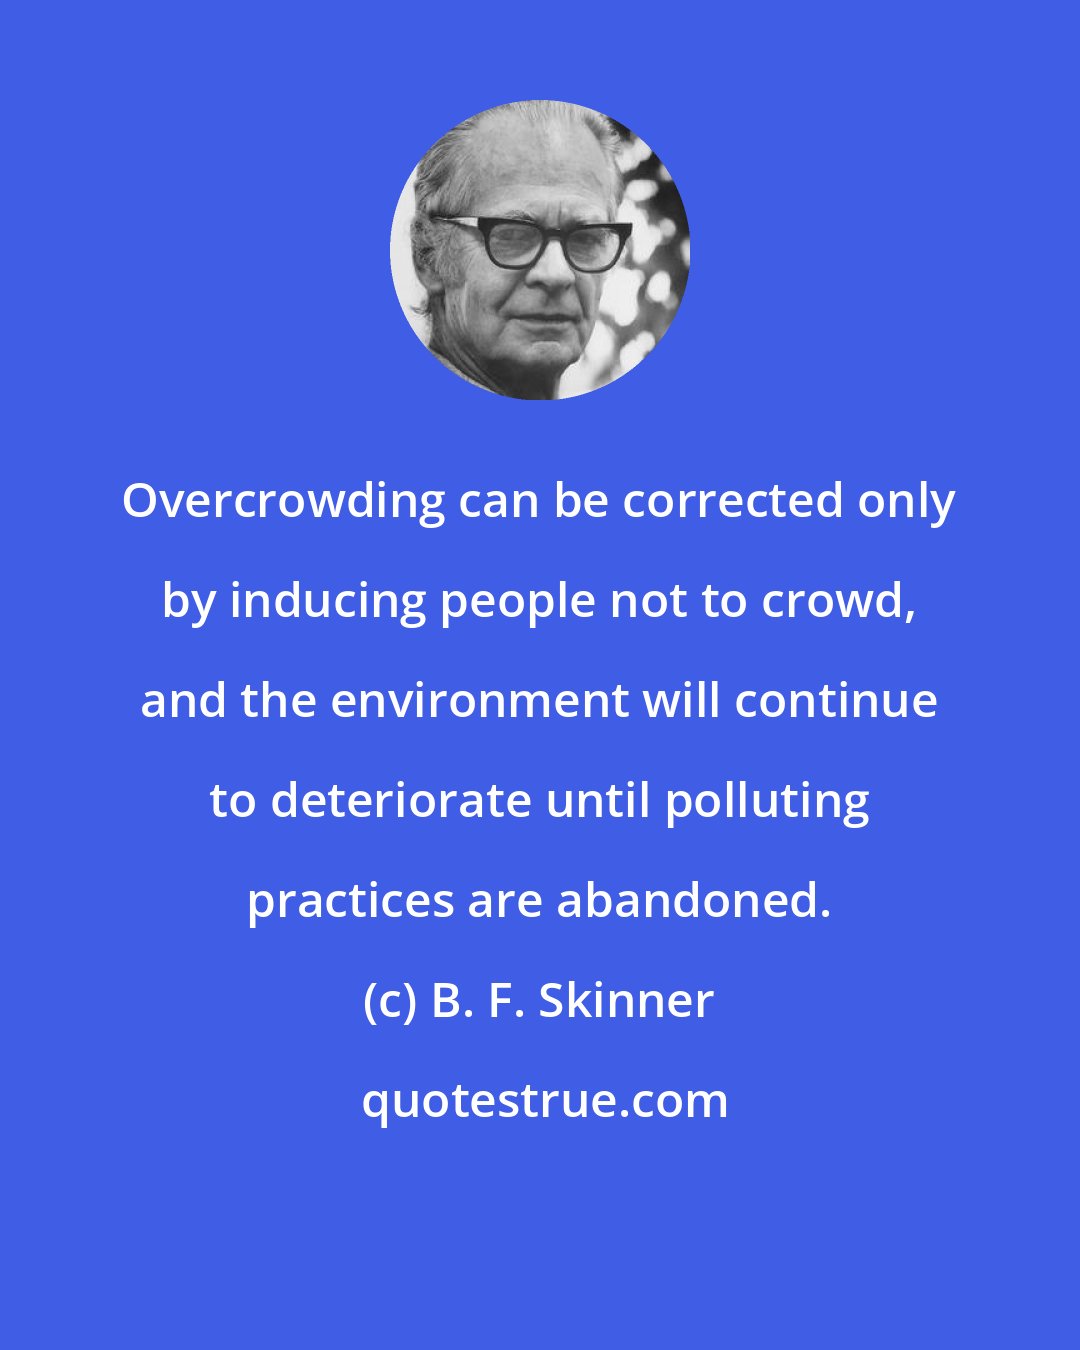 B. F. Skinner: Overcrowding can be corrected only by inducing people not to crowd, and the environment will continue to deteriorate until polluting practices are abandoned.